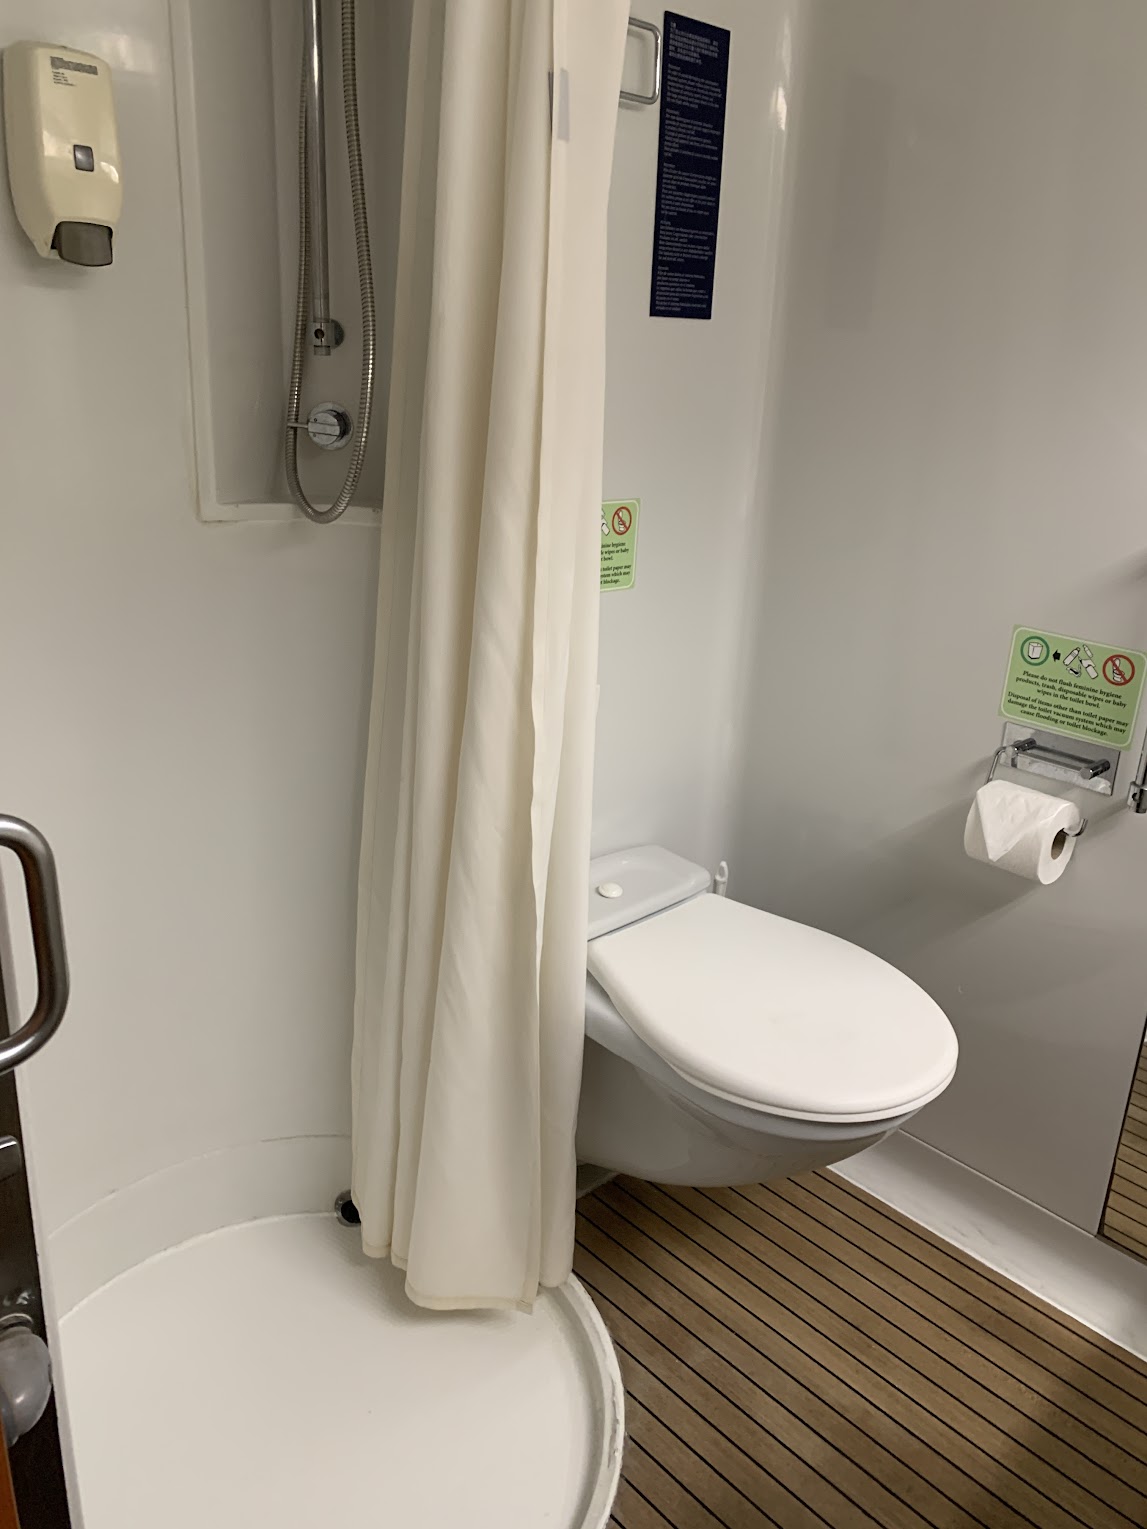 The Margaritaville at Sea interior stateroom bathroom showing the shower and bathroom.